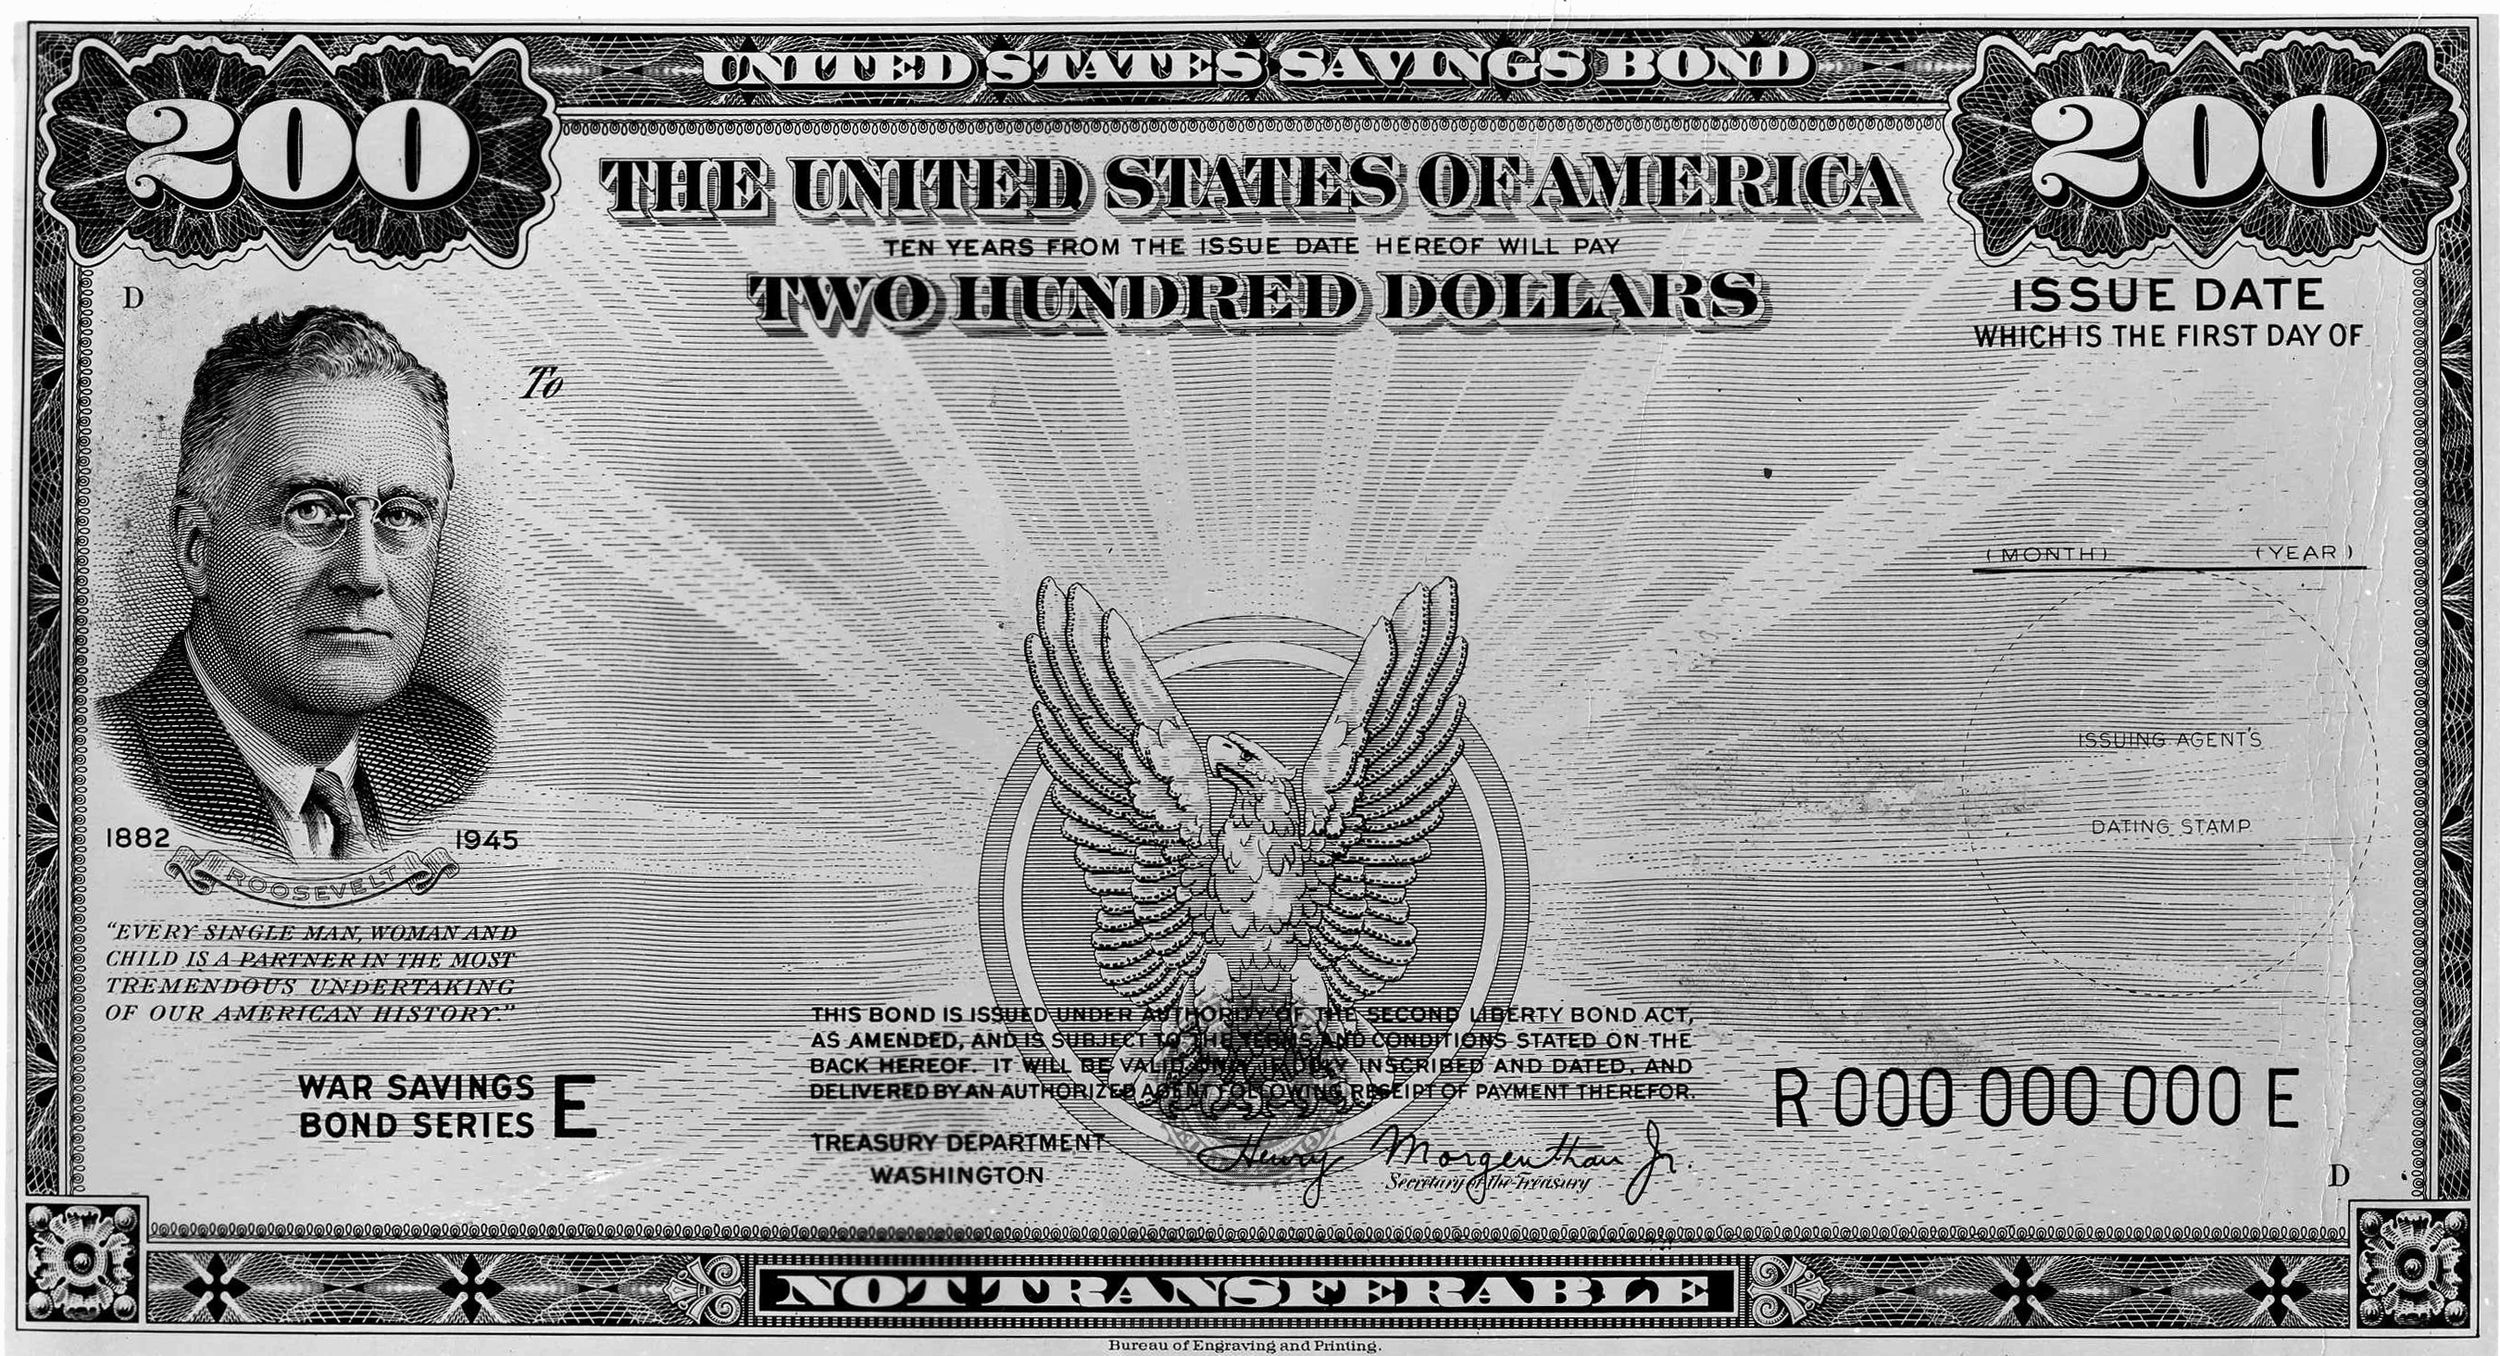 The Series E war bond, featuring a portrait of President Franklin D. Roosevelt, was initially offered for sale to the general public on May 1, 1941, seven months before U.S. entry into World War II.